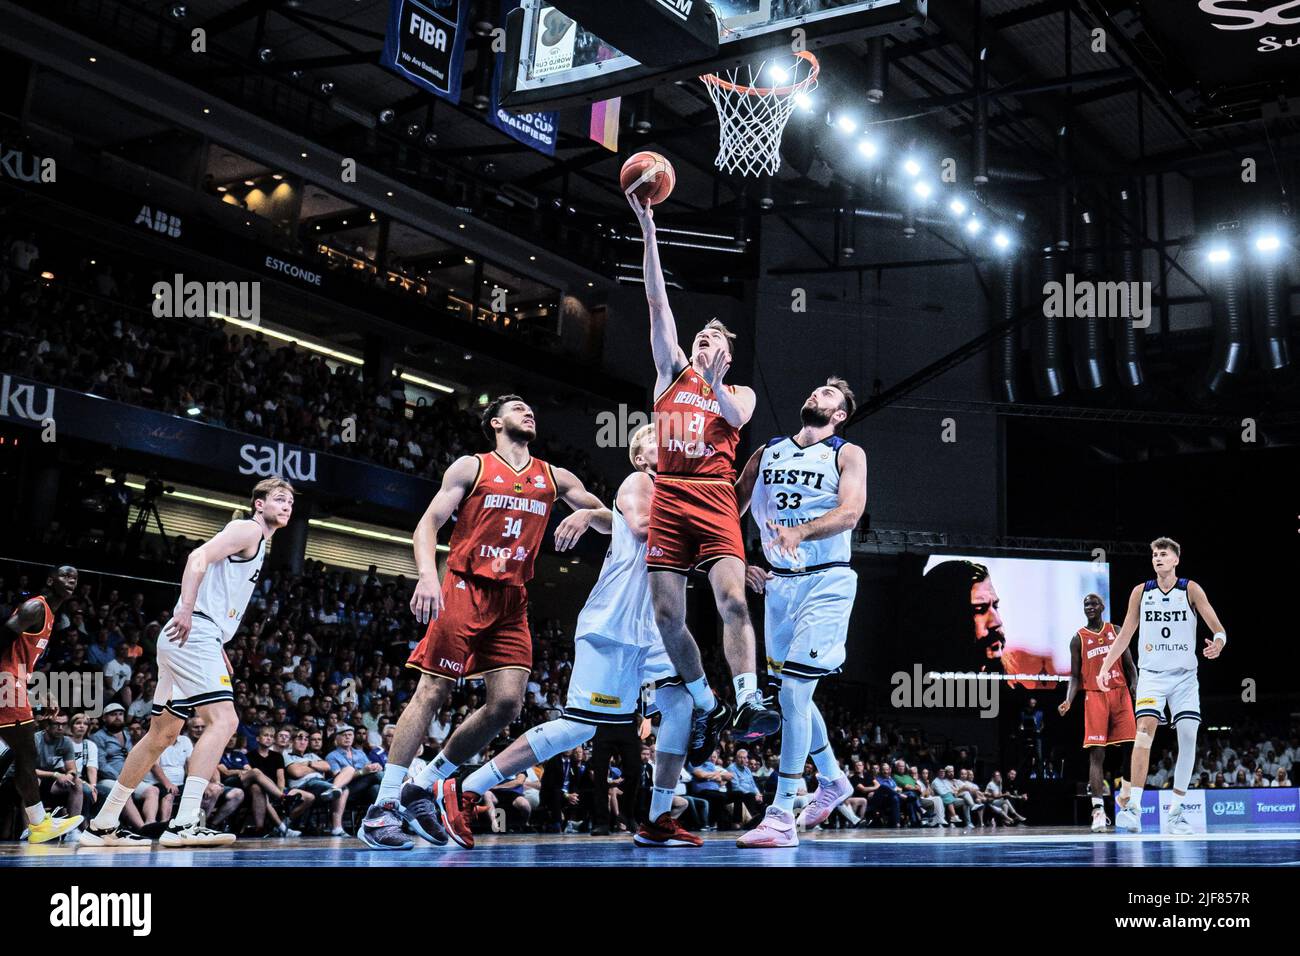 Tallinn, Estonia. 30th June, 2022. Basketball: World Cup Qualification, Estonia - Germany, Europe, 1st round, Group D, Matchday 5. Justus Hollatz from Germany in action. Credit: Hendrik Osula/dpa/Alamy Live News Stock Photo